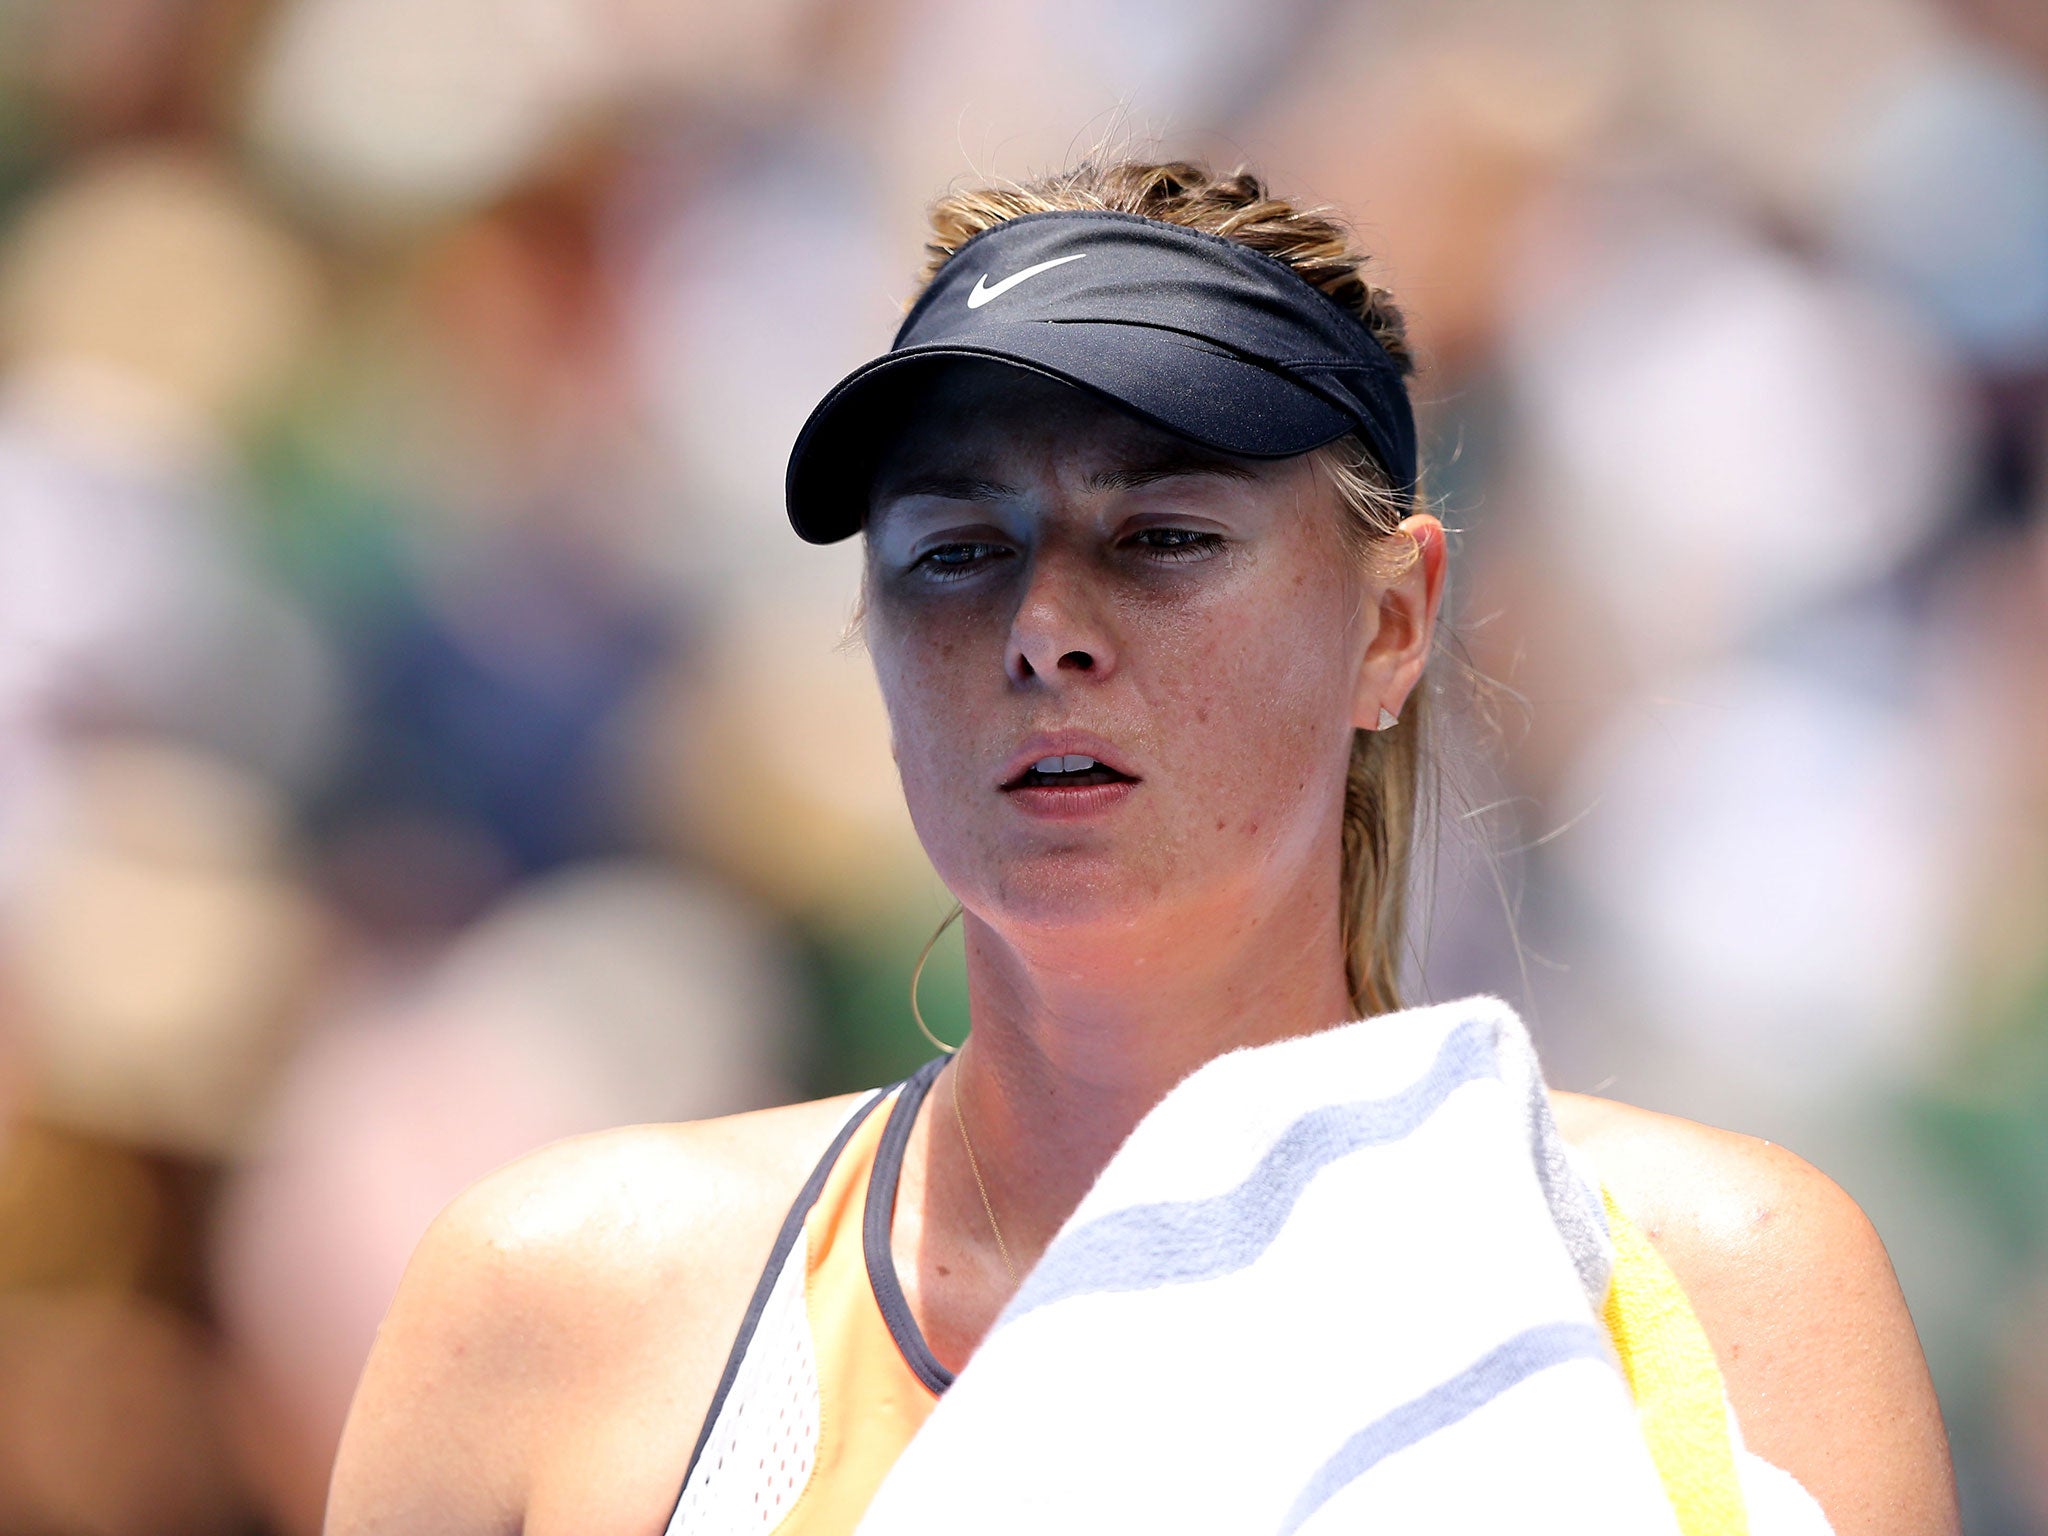 Maria Sharapova Sex Tape - Maria Sharapova retirement rumours as tennis star calls press conference to  make 'major announcement' | The Independent | The Independent